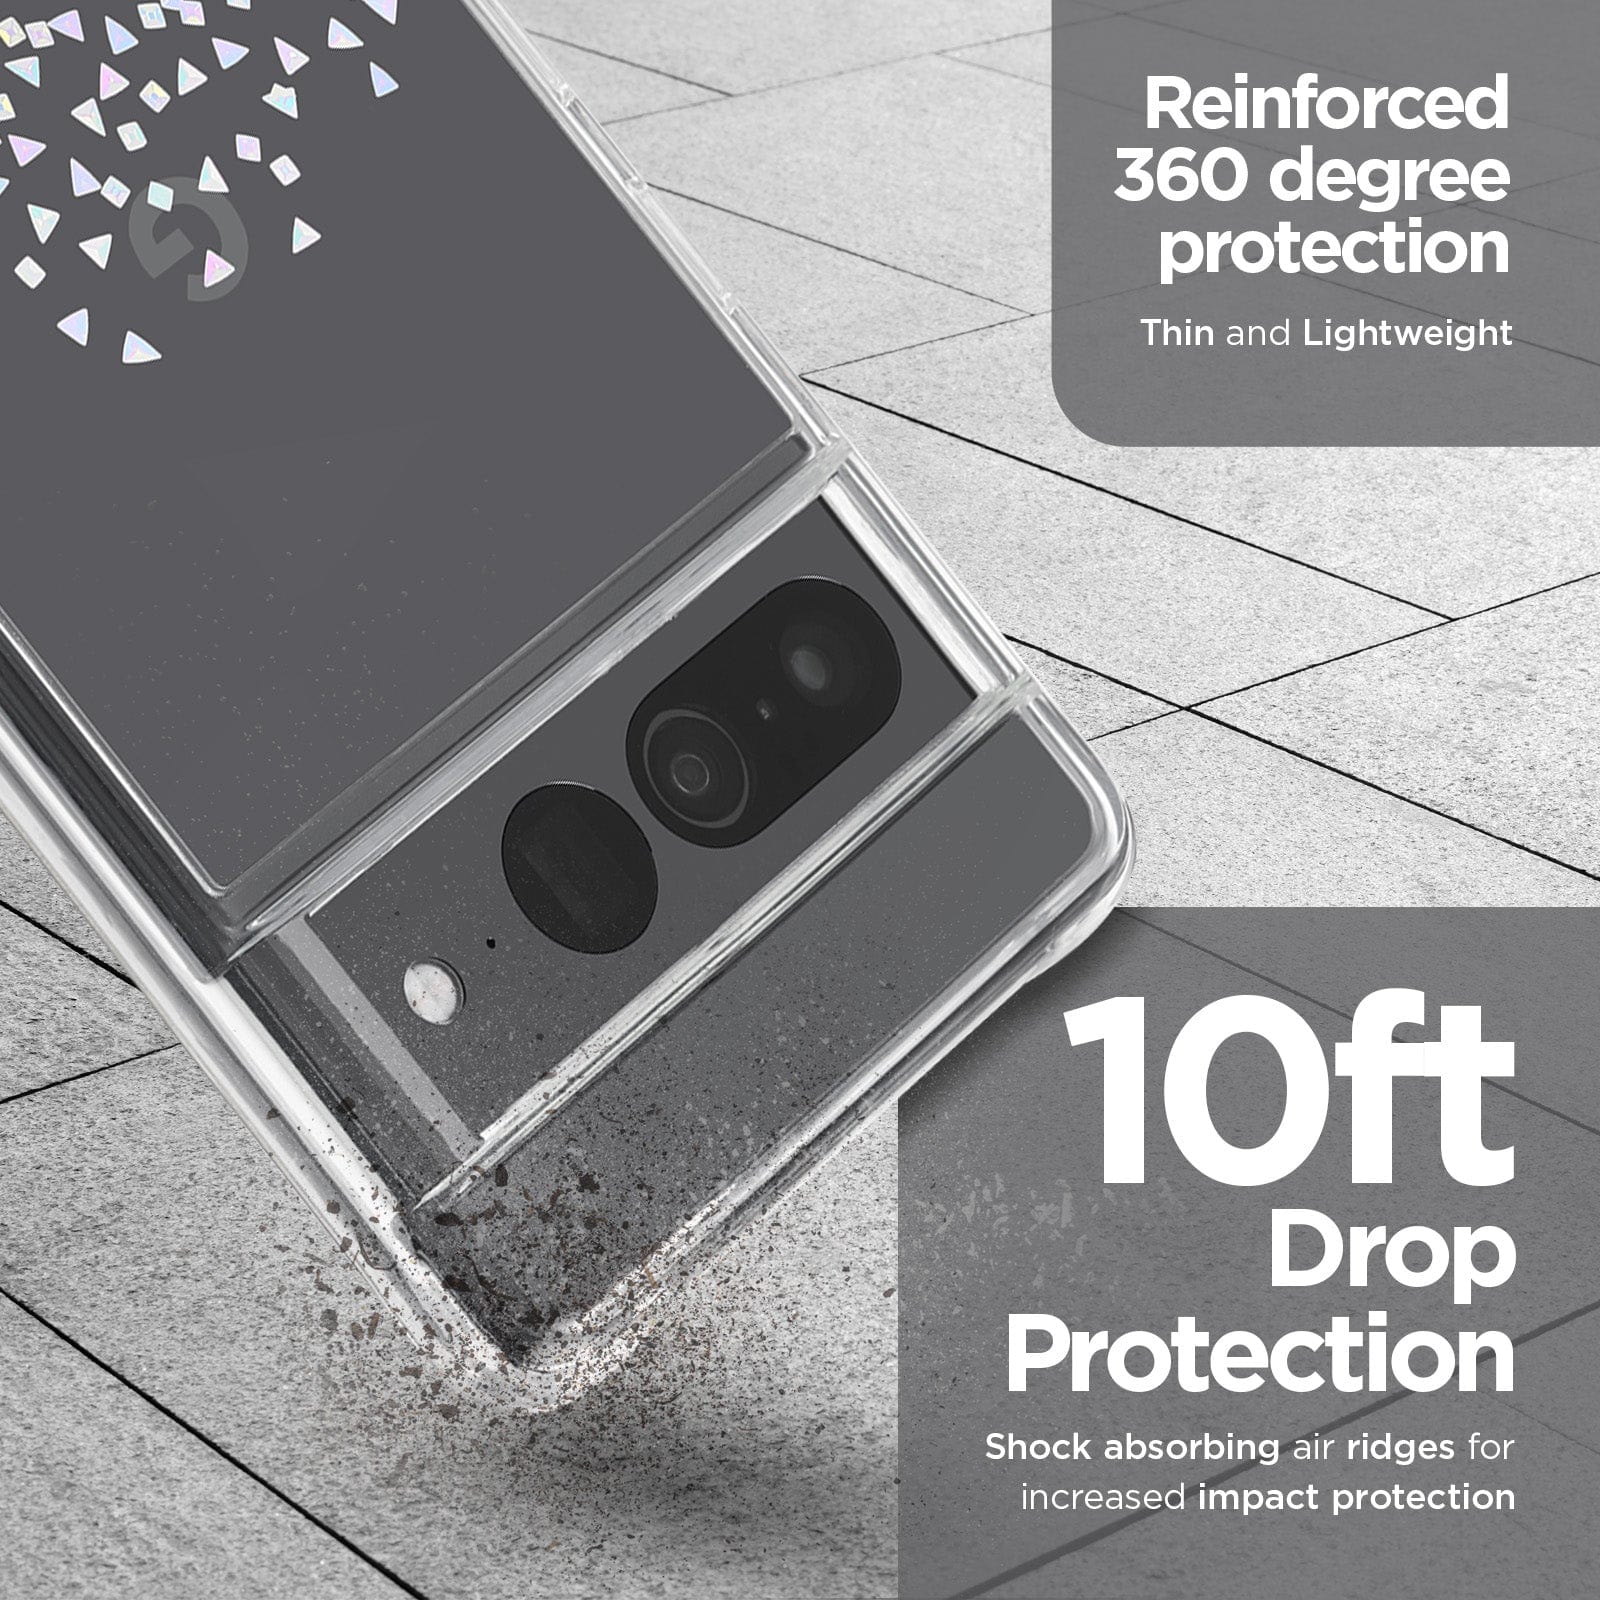 Reinforced 360 degree protection - thin and lightweight. 10ft drop protection with shock absorbing ridges for increased impact protection.